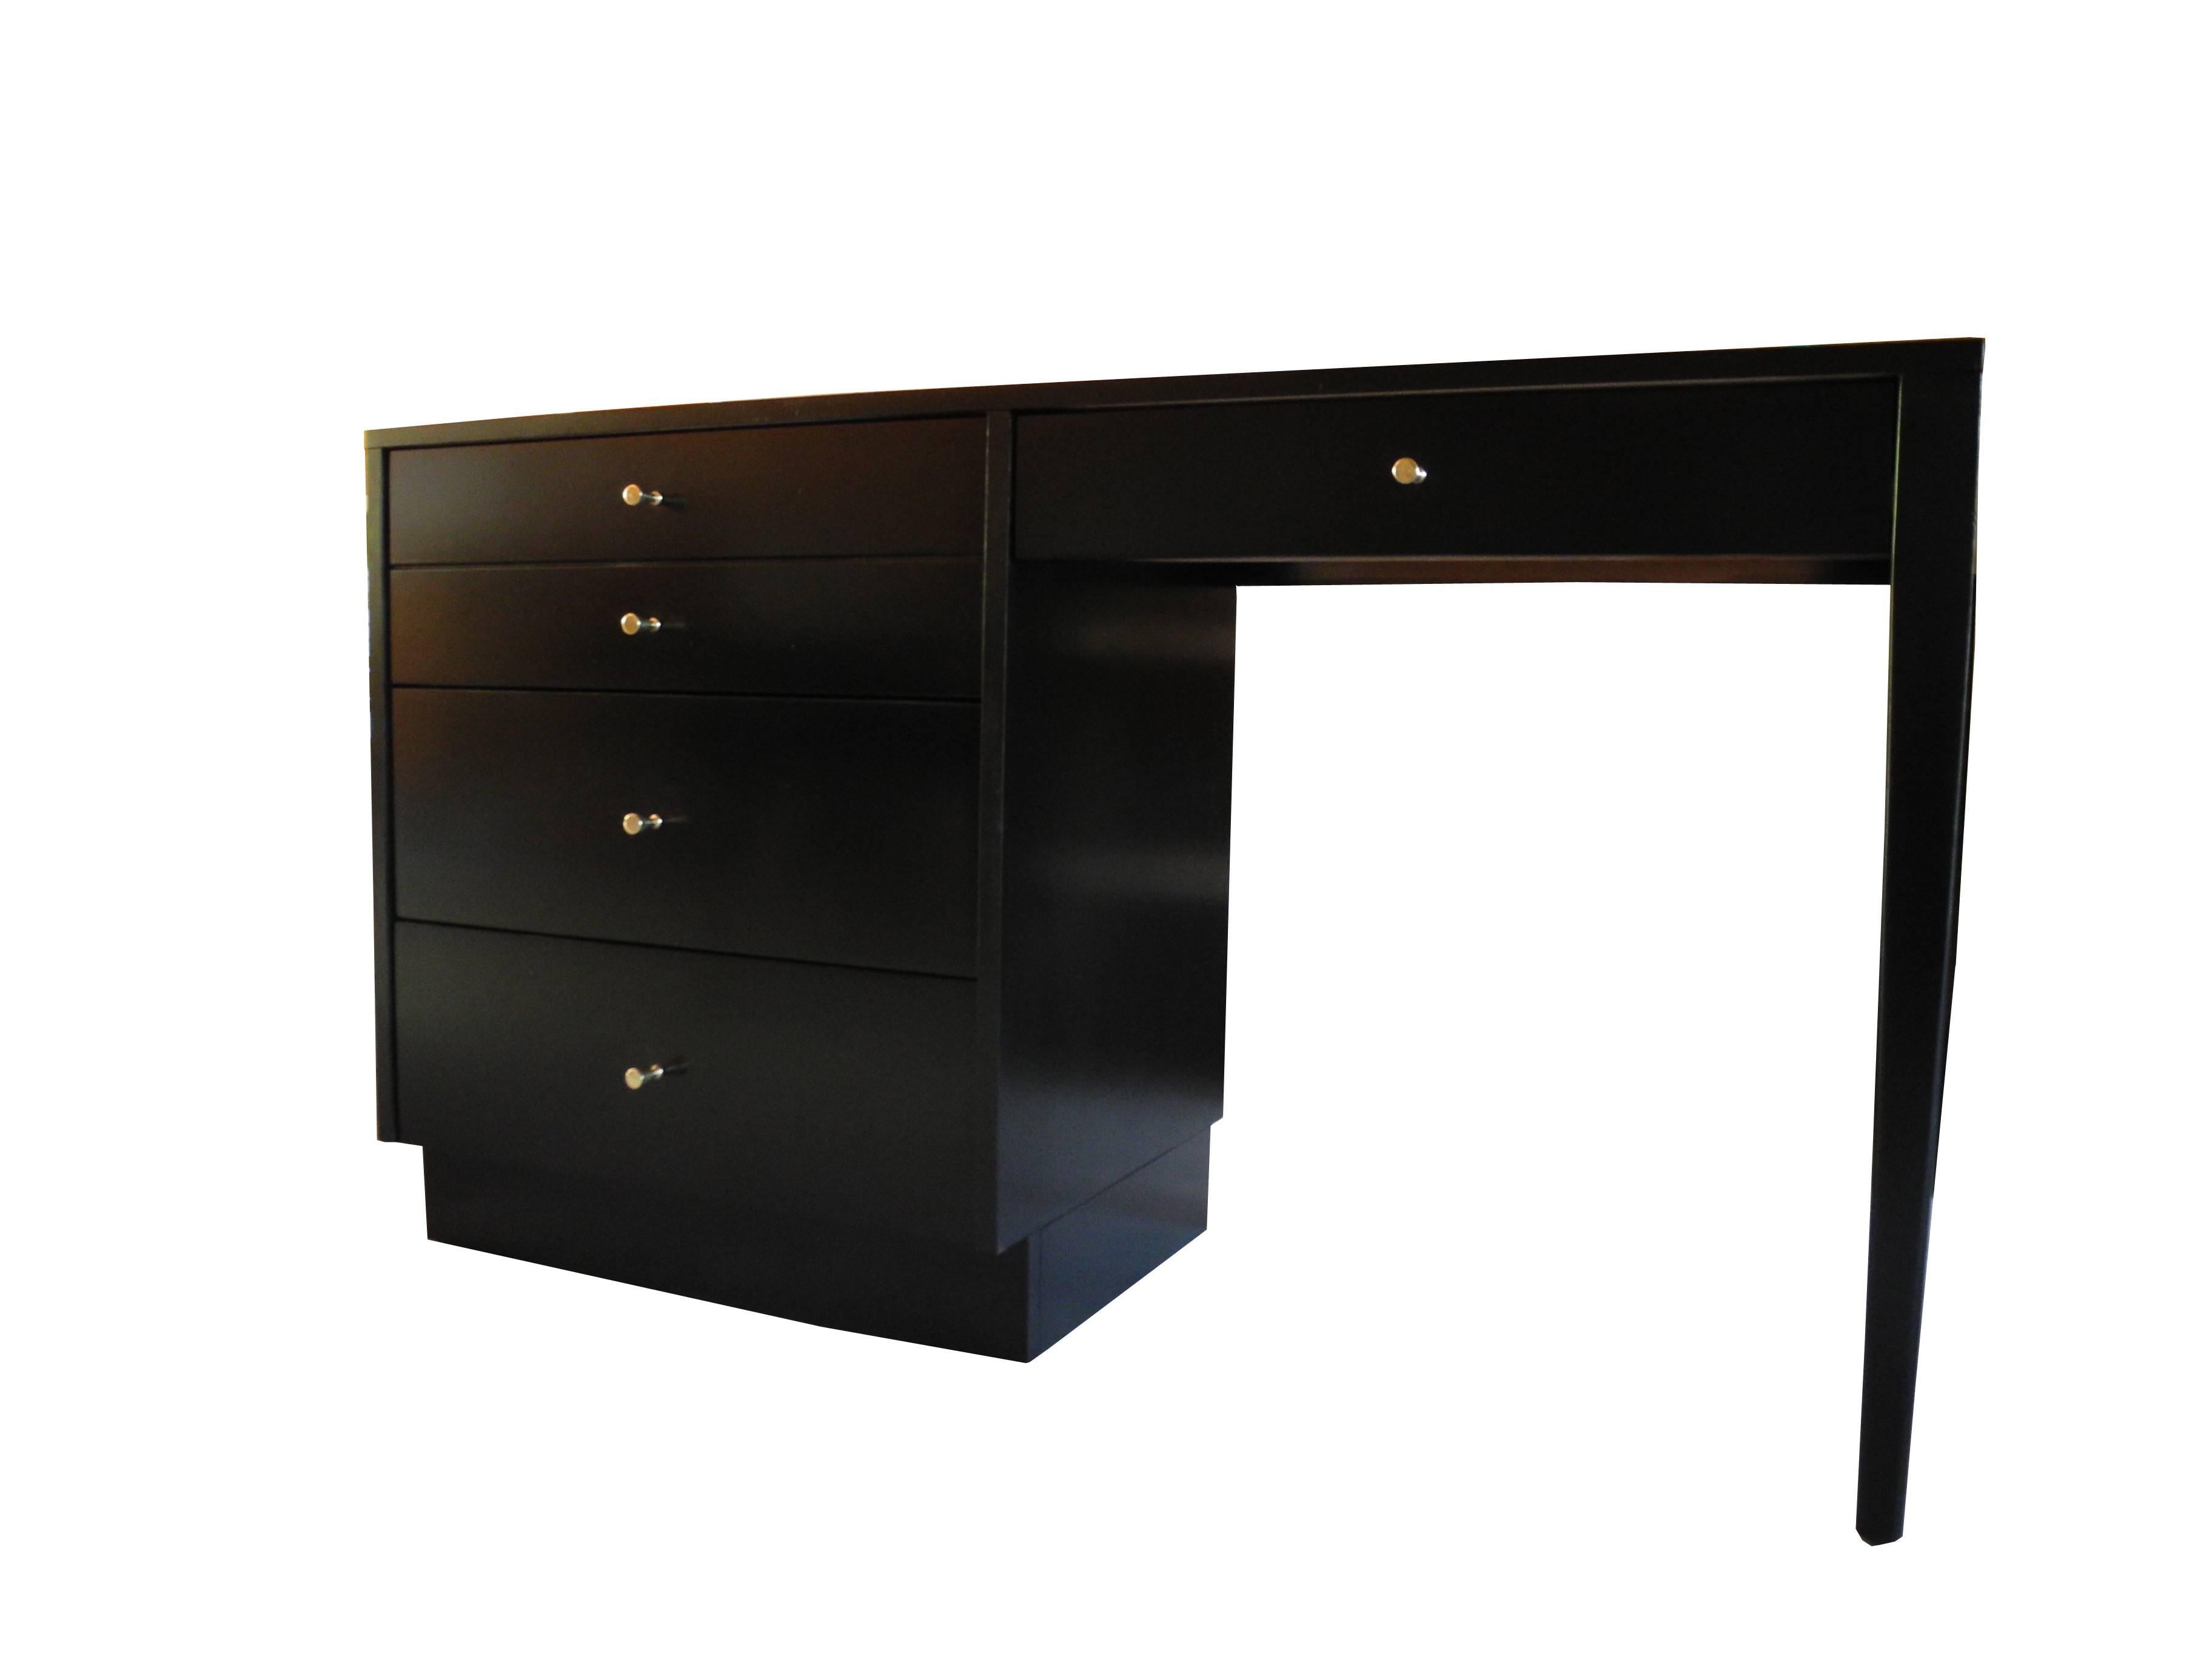 This beautifully proportioned desk was designed by Paul McCobb in the 1950s.
The desk is equipped with a left bank of three drawers with solid brass knobs.
Also sporting a pencil drawer it is a slim 18 inches deep.